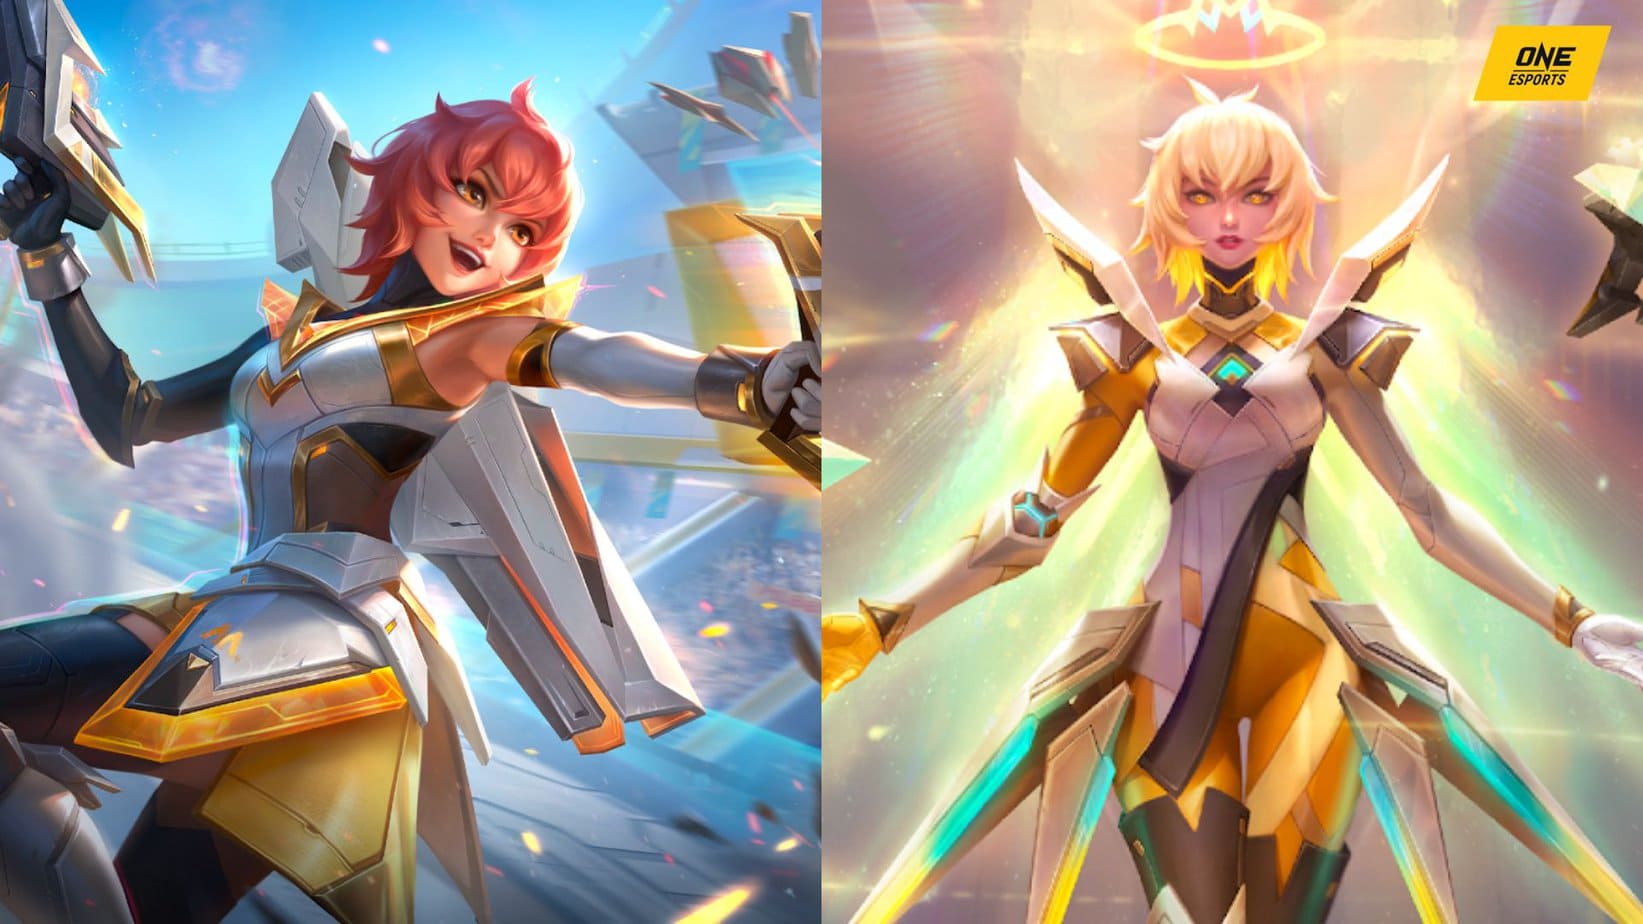 How to unlock Light Chaser Beatrix and Stellar Brilliance Beatrix, M4 exclusive skins - ONE Esports